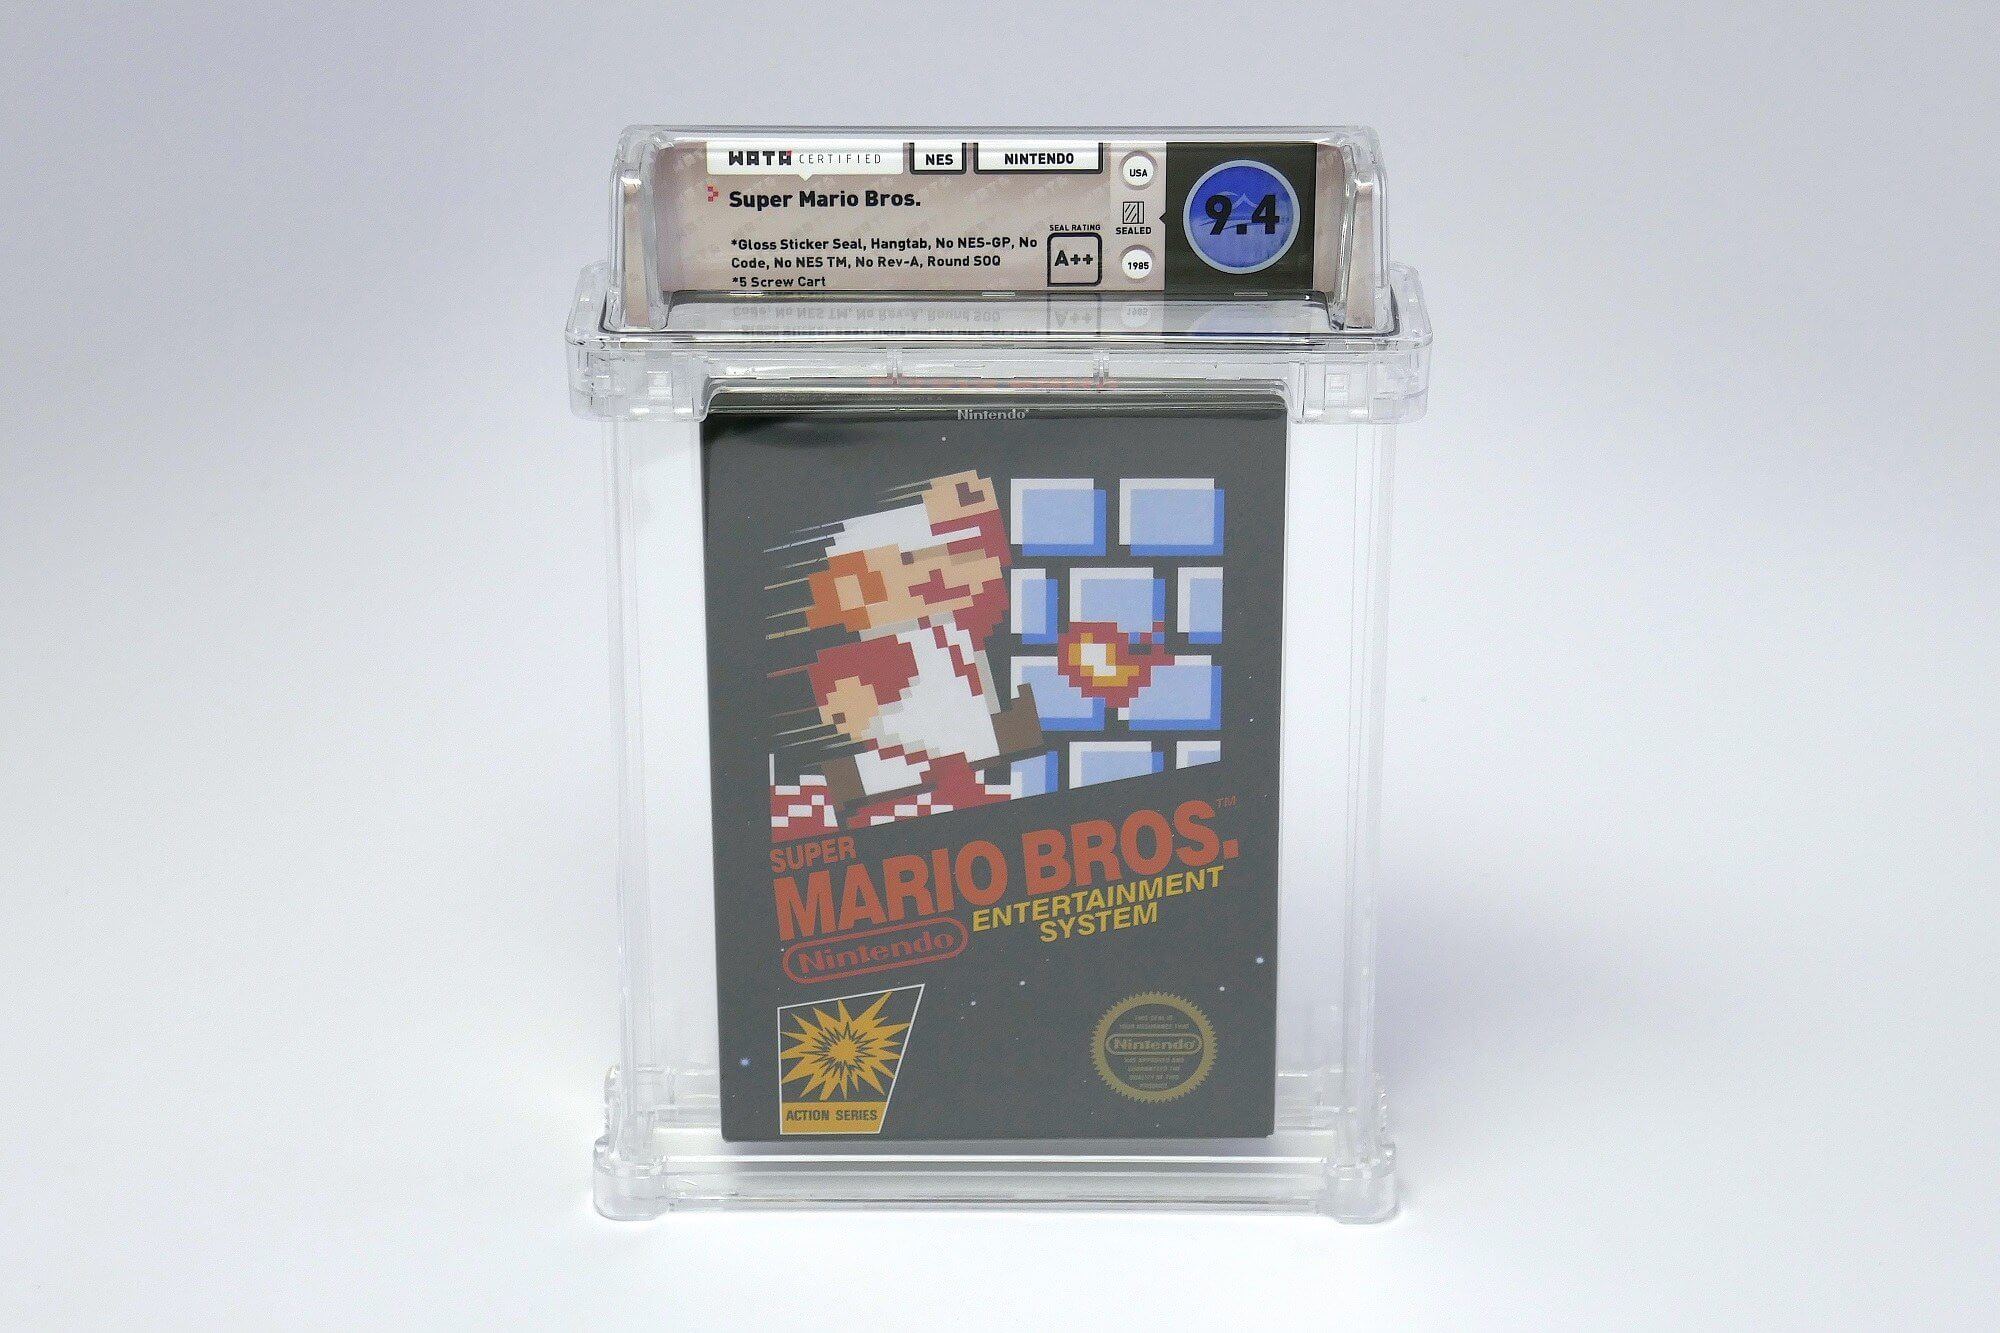 Sealed copy of Super Mario Bros. goes for over $100,000 at auction